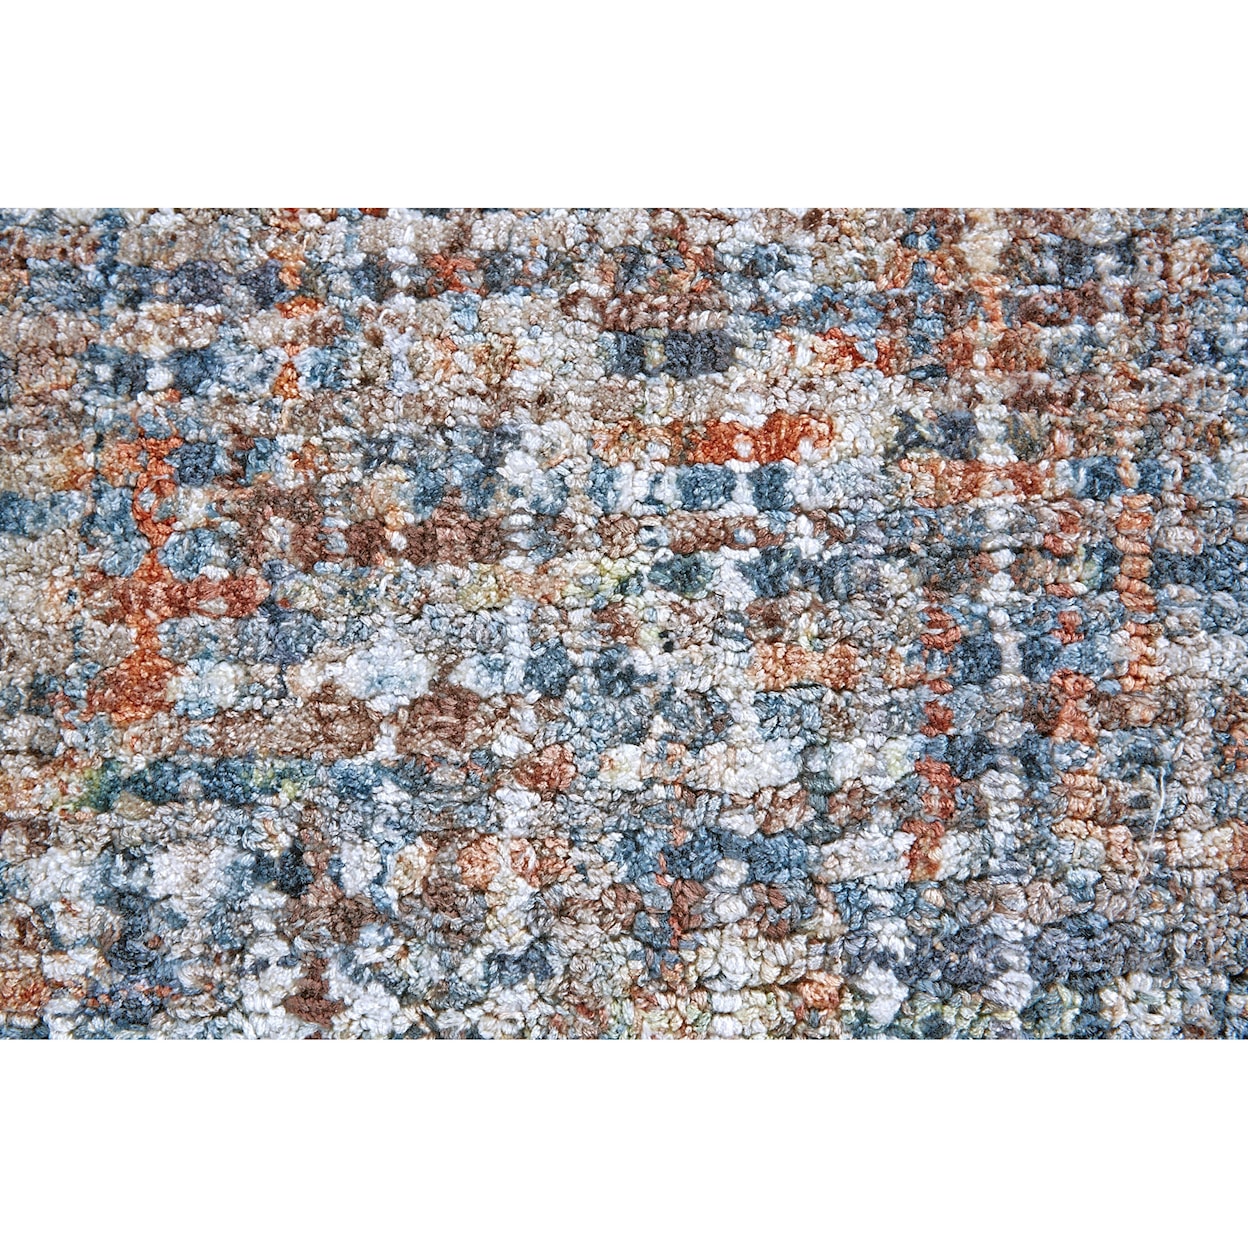 Feizy Rugs St. Germaine Amour 5' x 8' Area Rug